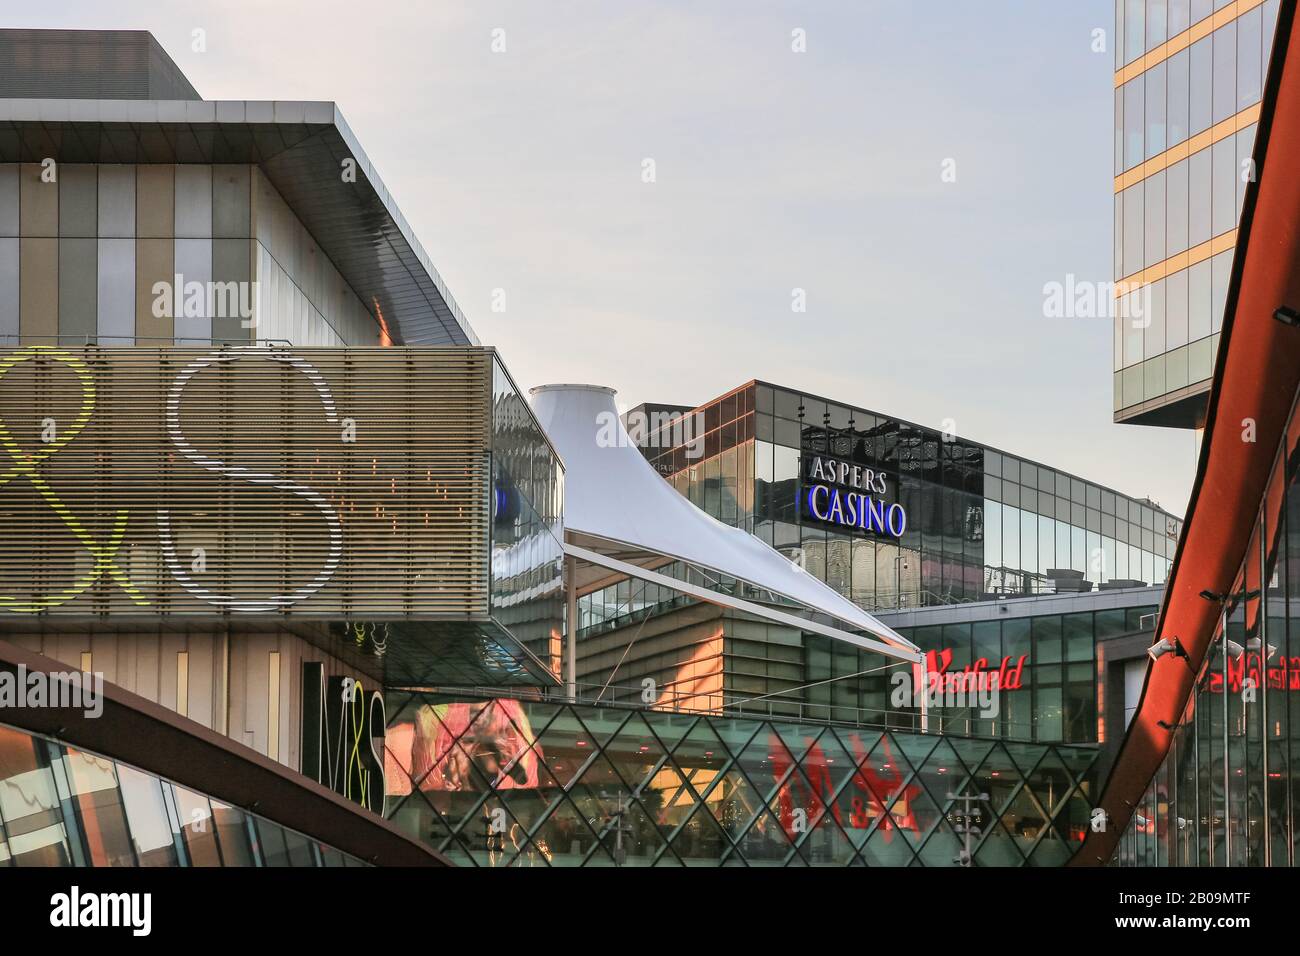 Retail brand logos, shops and shopping mall architecture at Westfield Stratford Shopping Centre, exterior, Stratford, London, UK Stock Photo